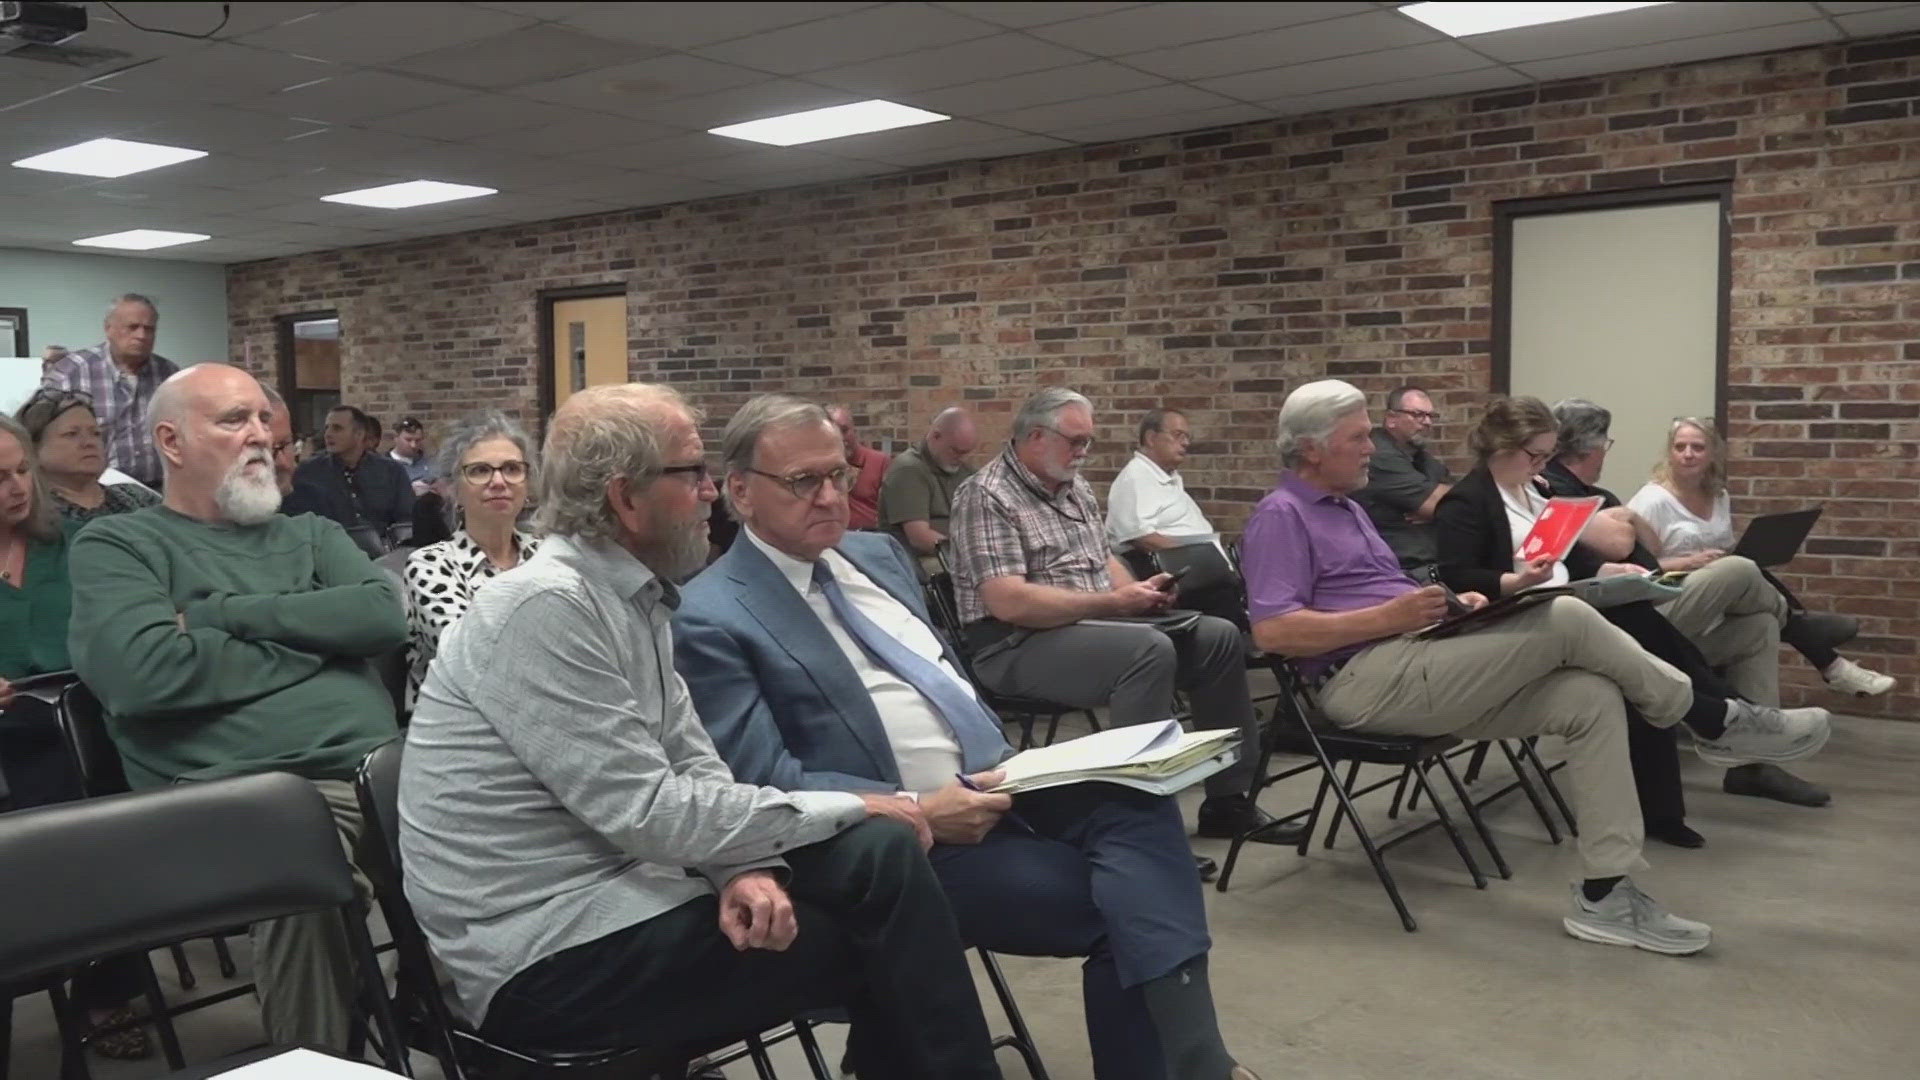 THE FORT SMITH CITY PLANNING COMMISSION SAYS NO TO A PLAN TO REGULATE WHAT CAN AND CAN'T BE BUILT NEAR THE FORT SMITH AIRPORT...